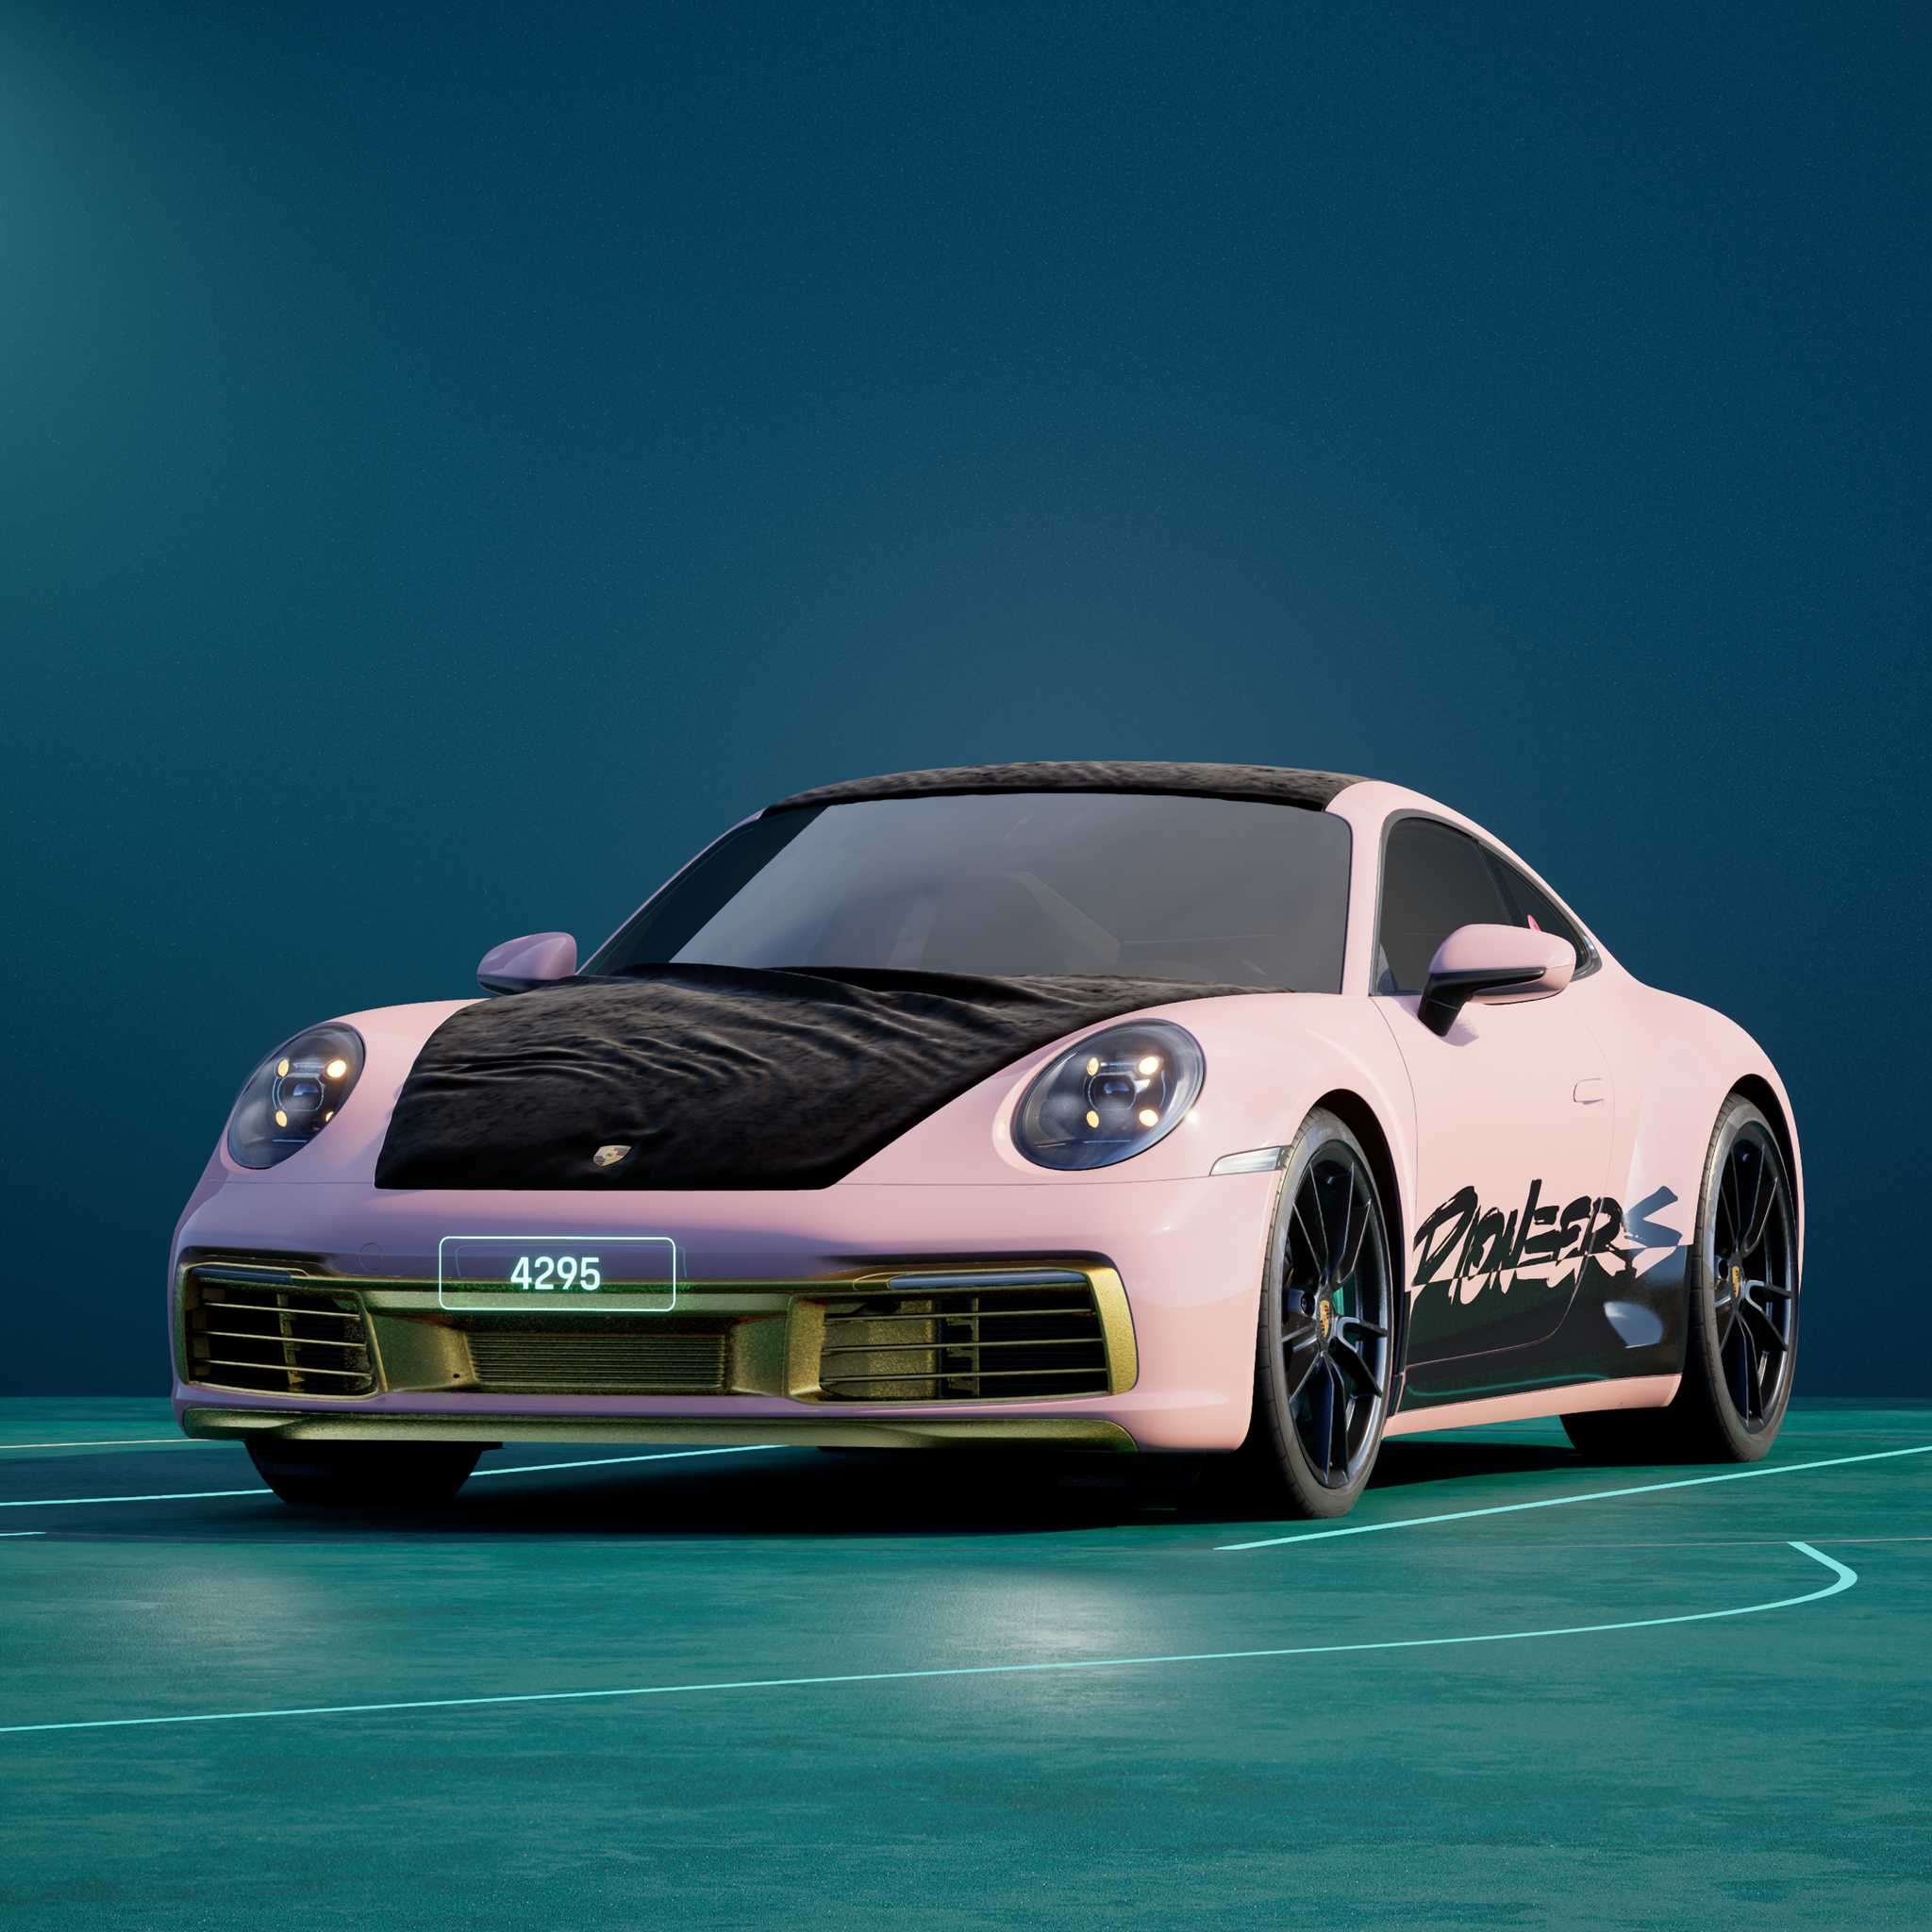 The PORSCHΞ 911 4295 image in phase